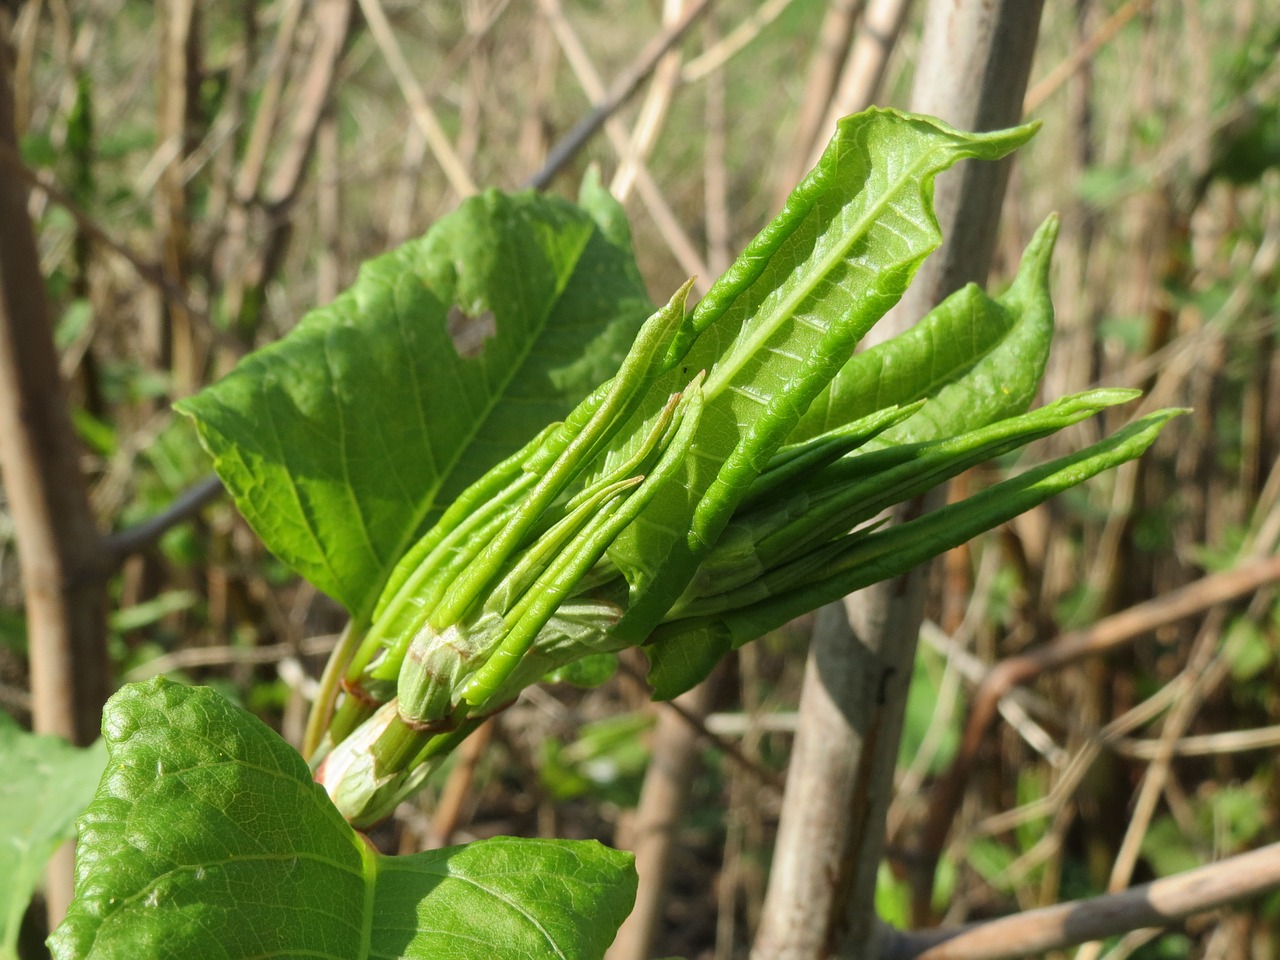 Young Japanese Knotweed leaves.